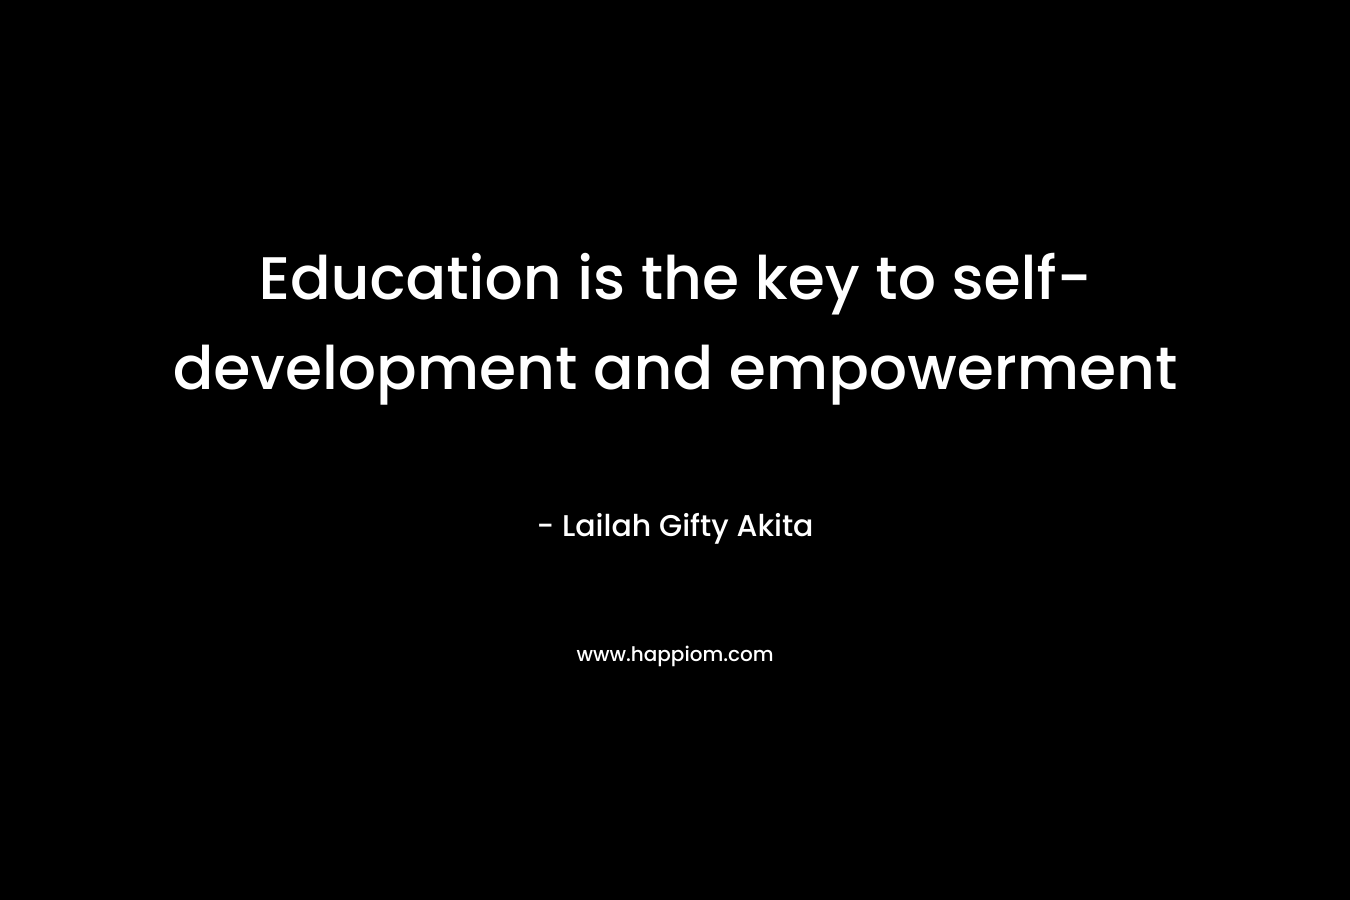 Education is the key to self-development and empowerment – Lailah Gifty Akita